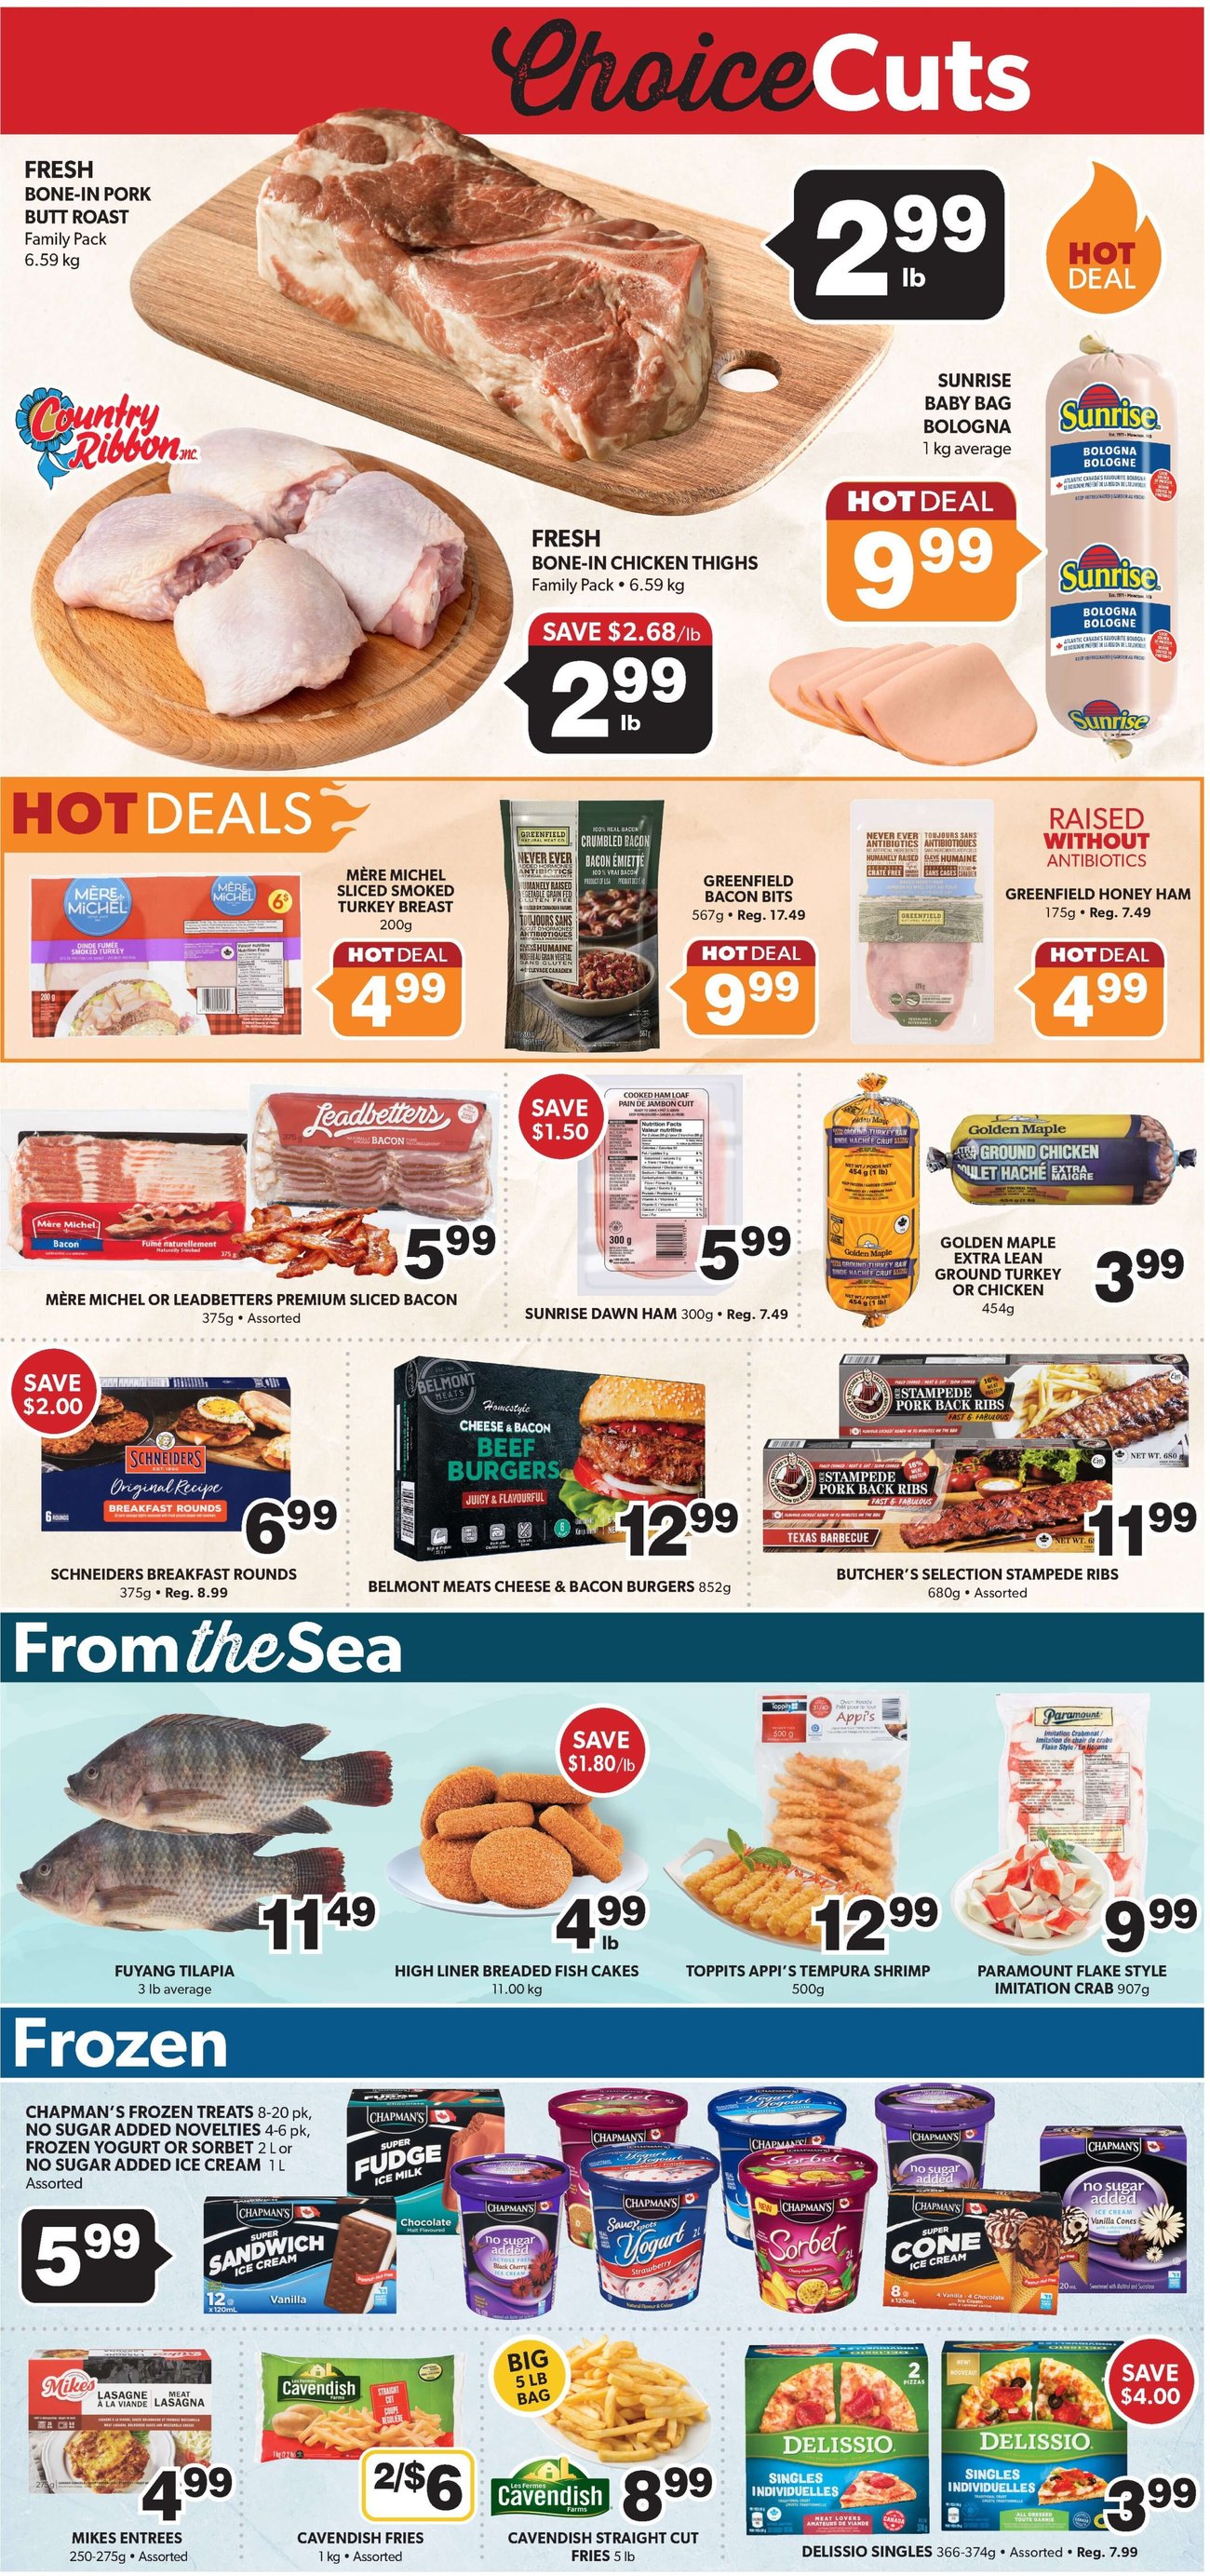 Colemans - Weekly Flyer Specials - Page 4